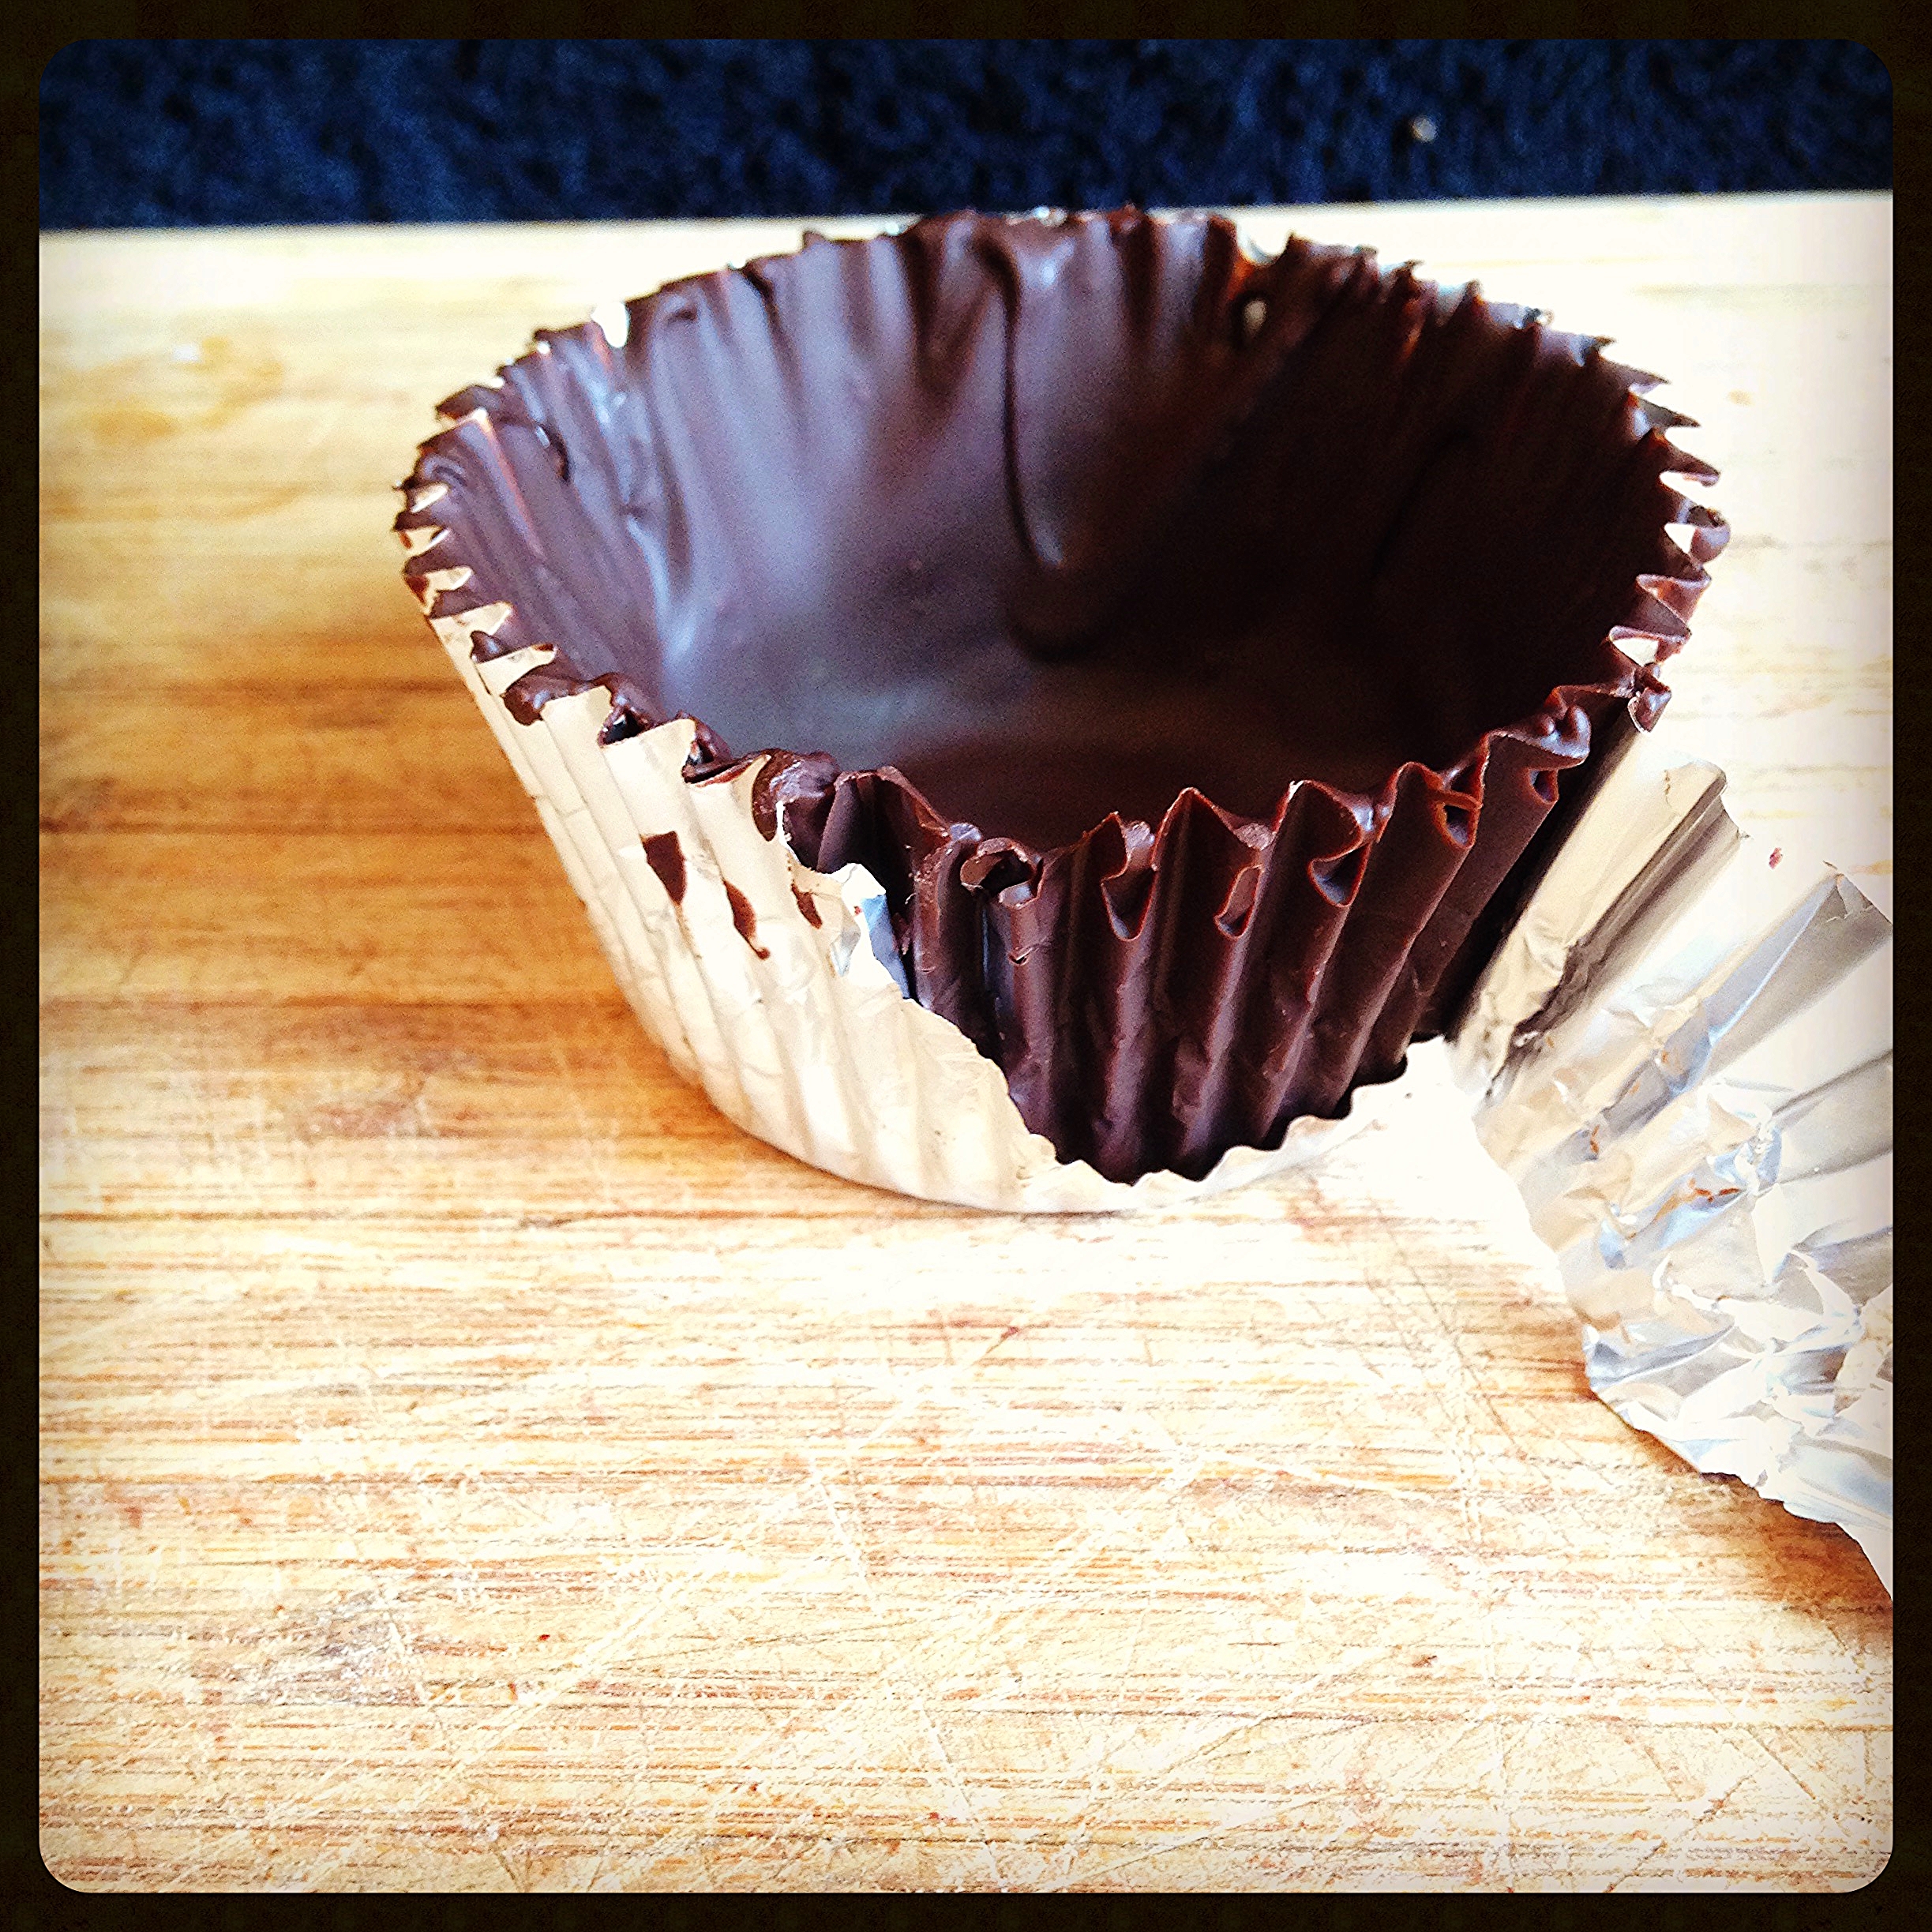 Removing the chocolate cup foil 